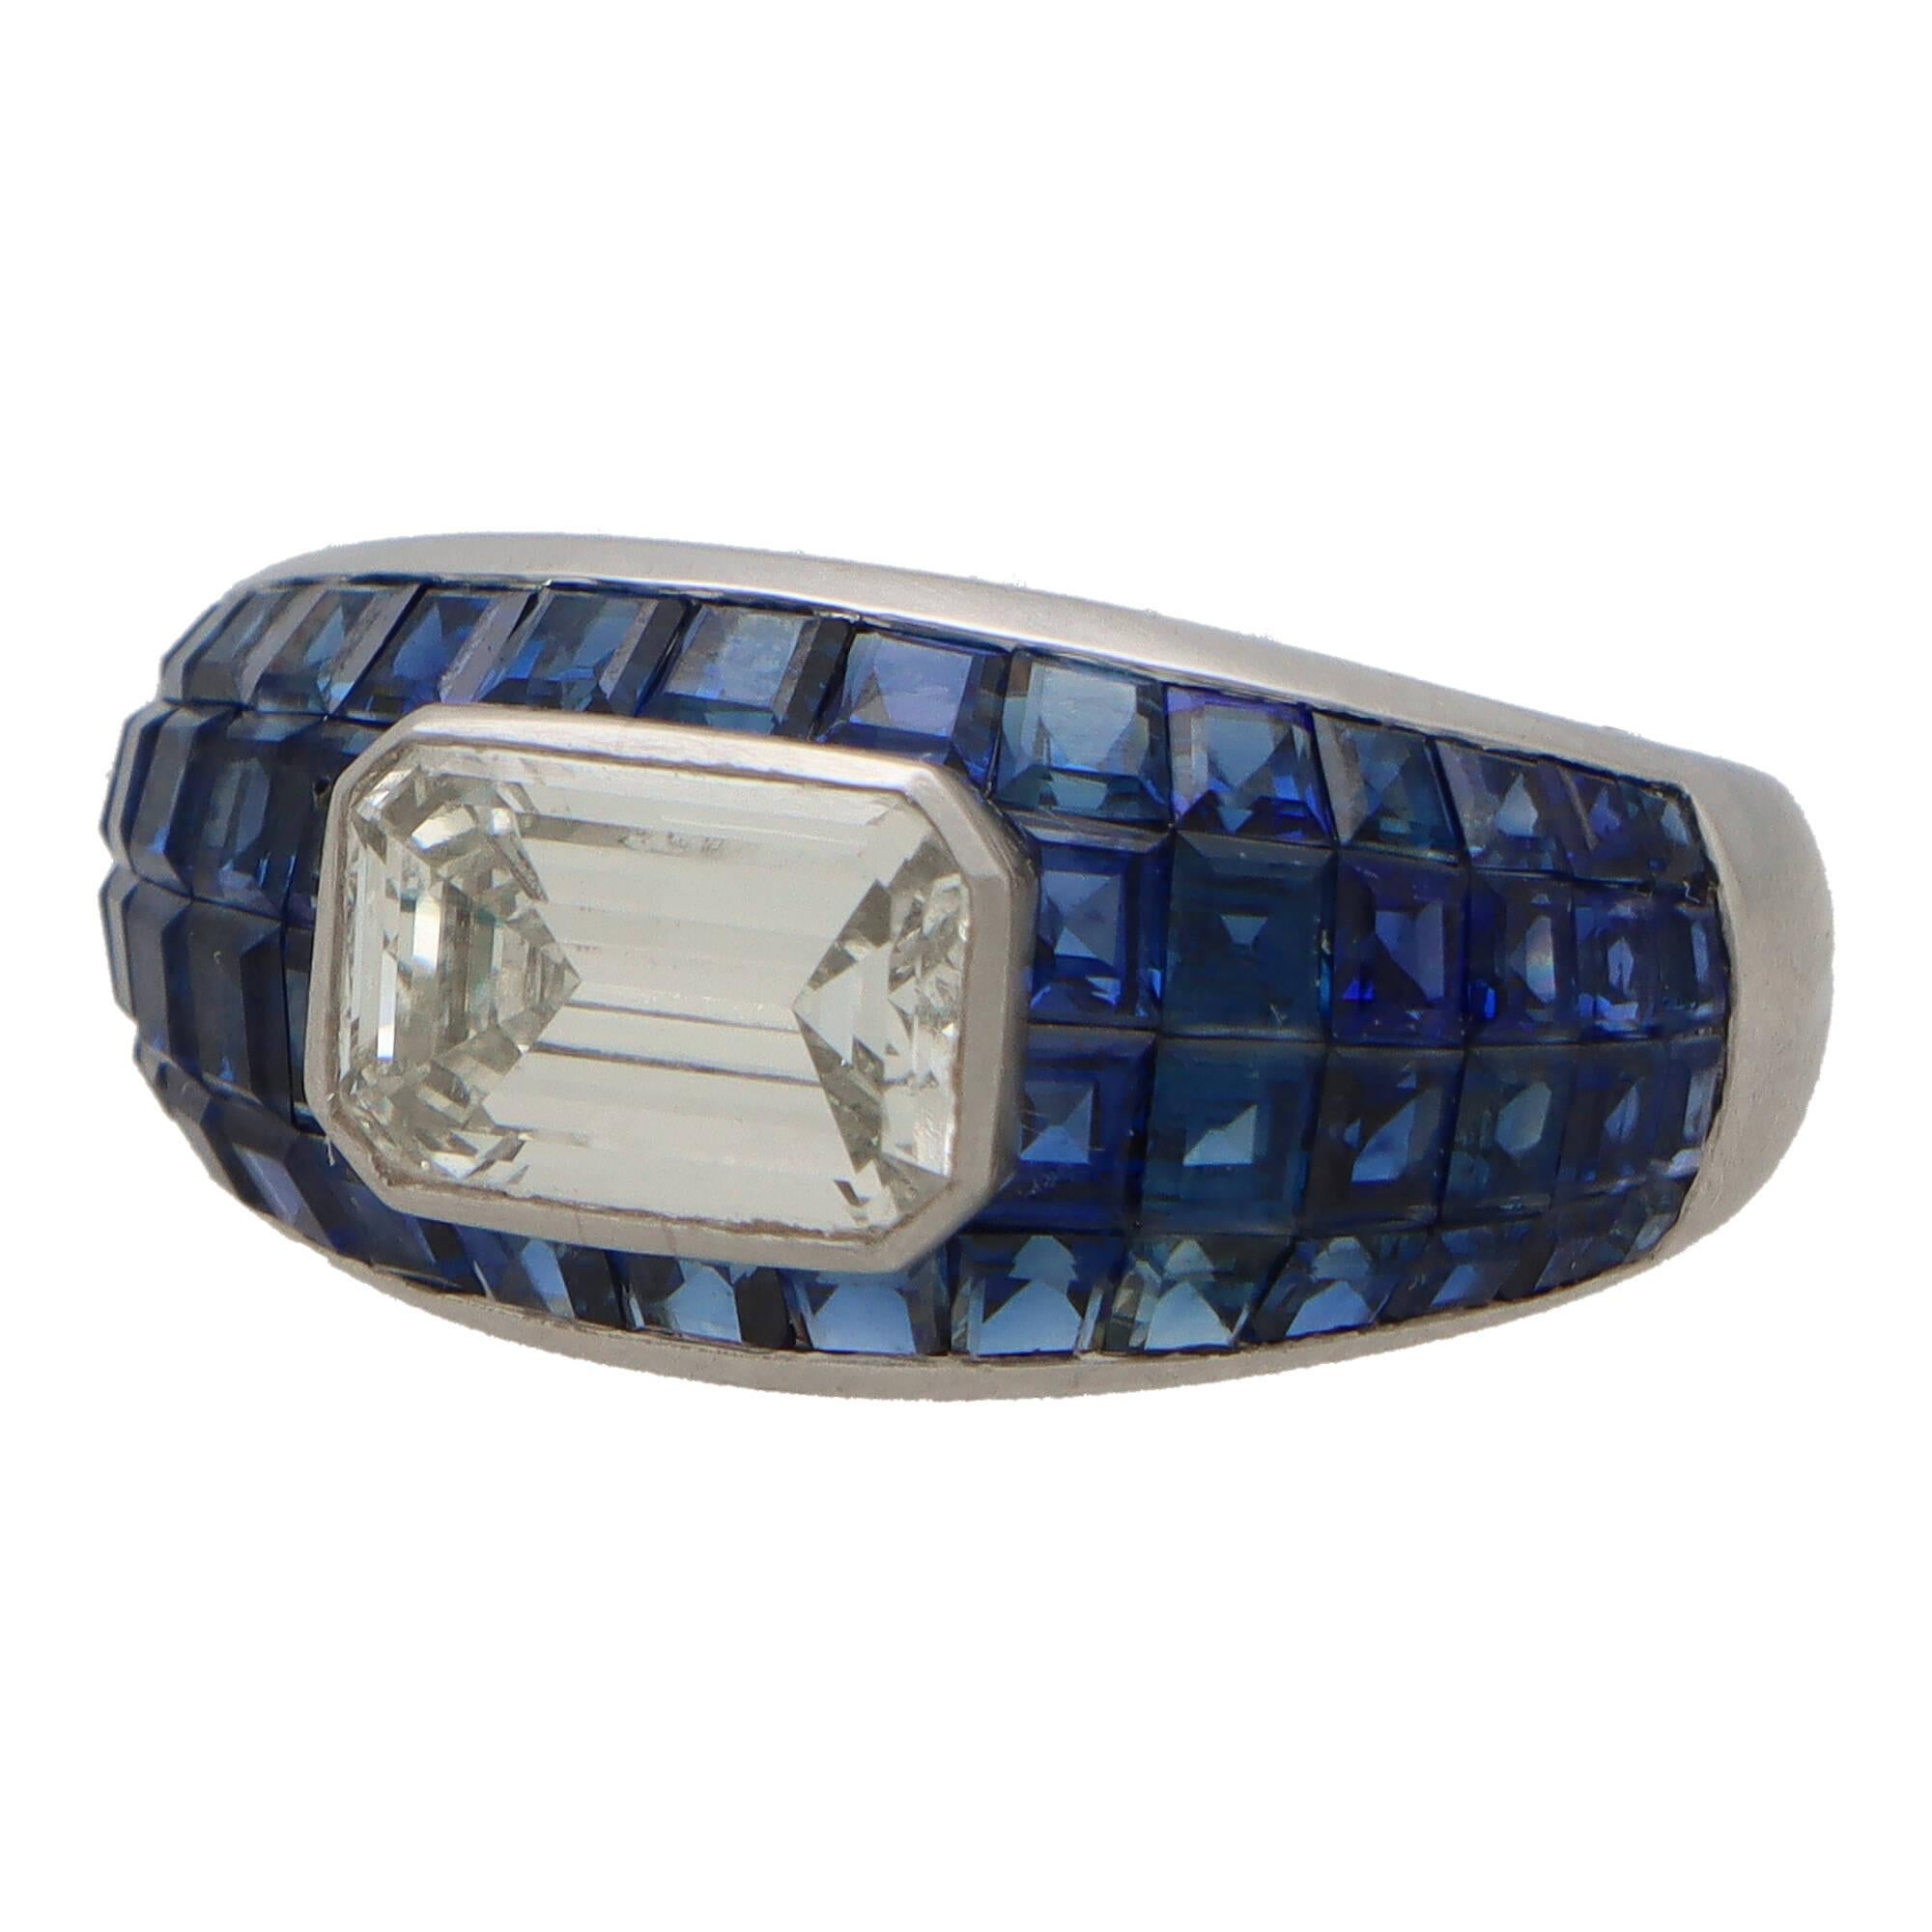 A beautiful Art Deco inspired blue sapphire and diamond bombe dress ring set in platinum.

The ring is composed in a striking bombe design, invisibly set with calibre cut blue sapphire stones. Set centrally to the ring is a rub over set emerald cut